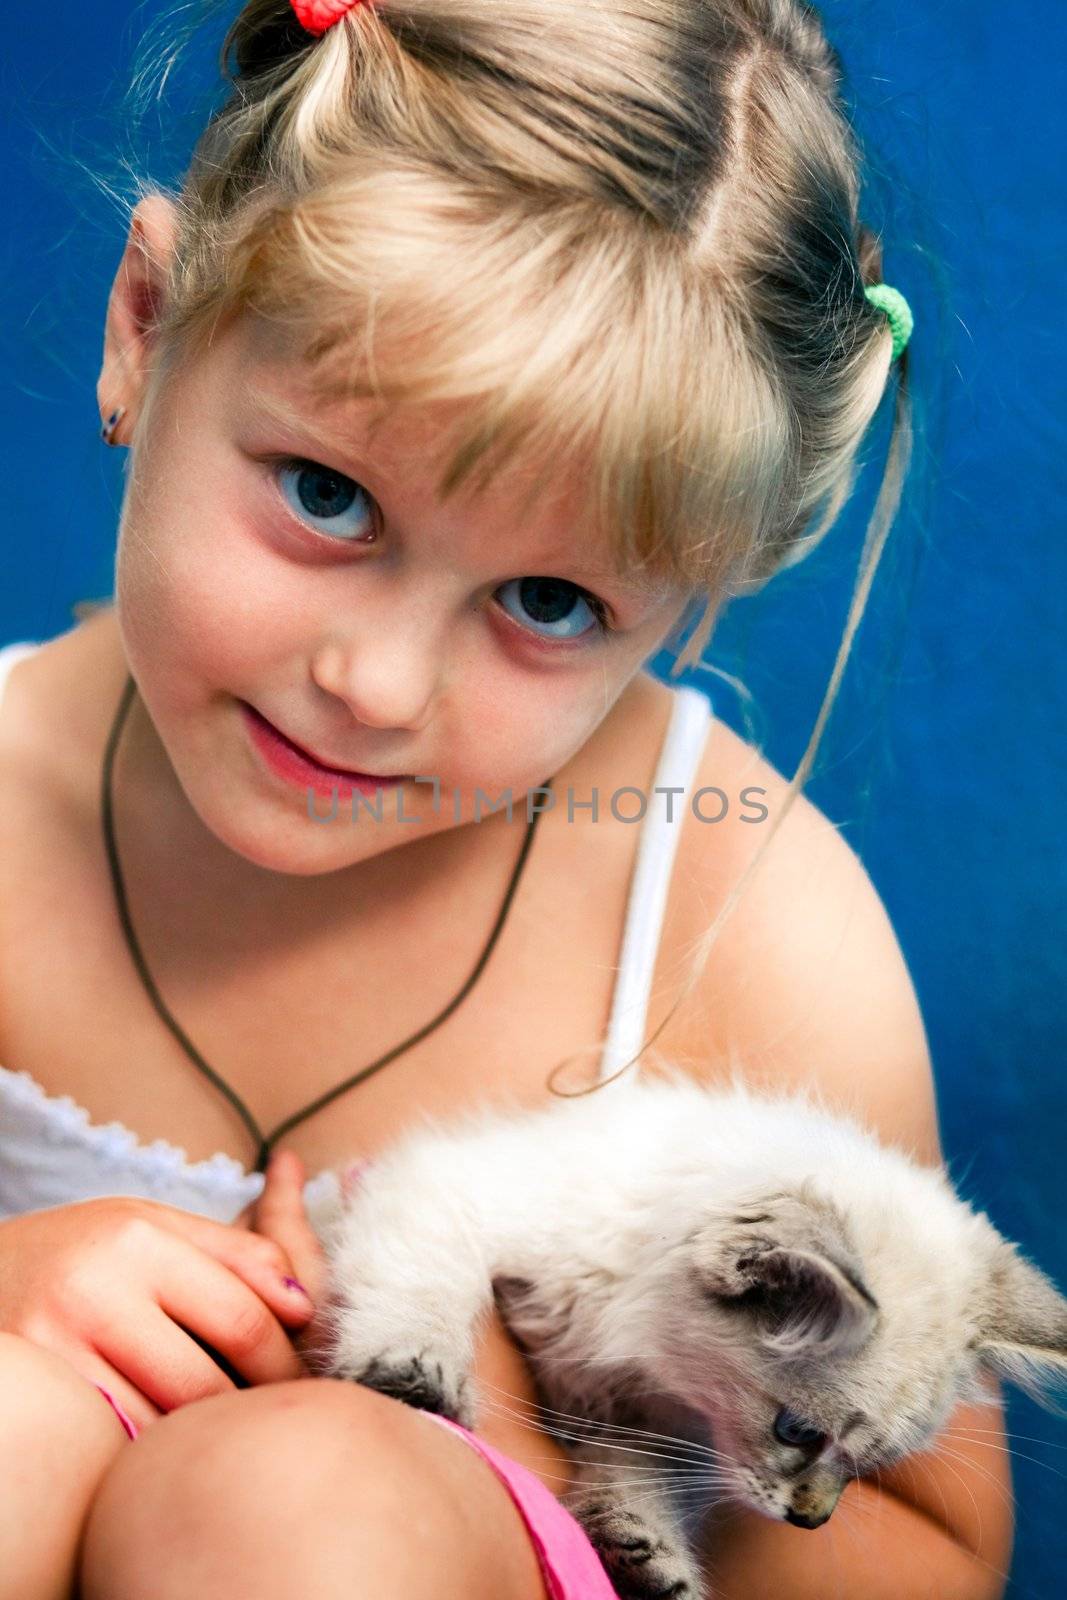 Smiling girl with a kitten in her arms